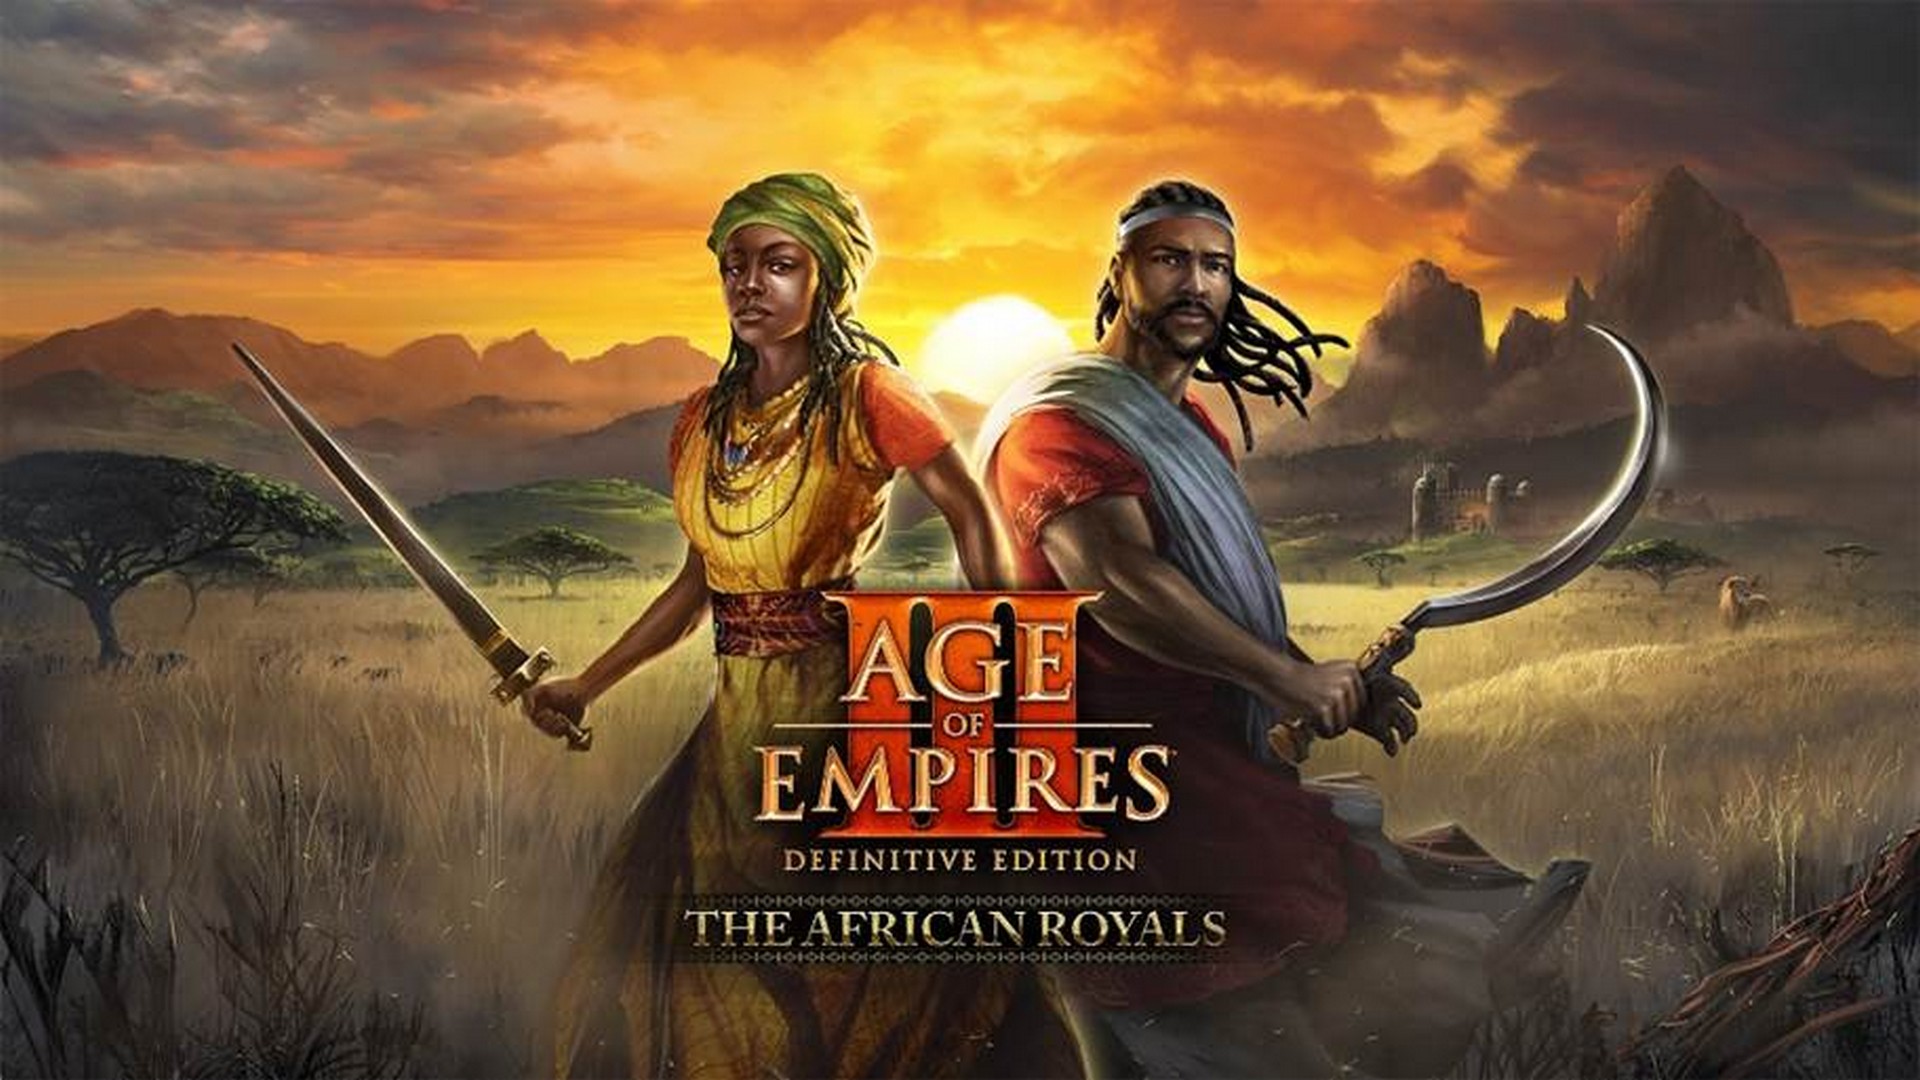 Age of Empires III: Definitive Edition – The African Royals DLC Available Now